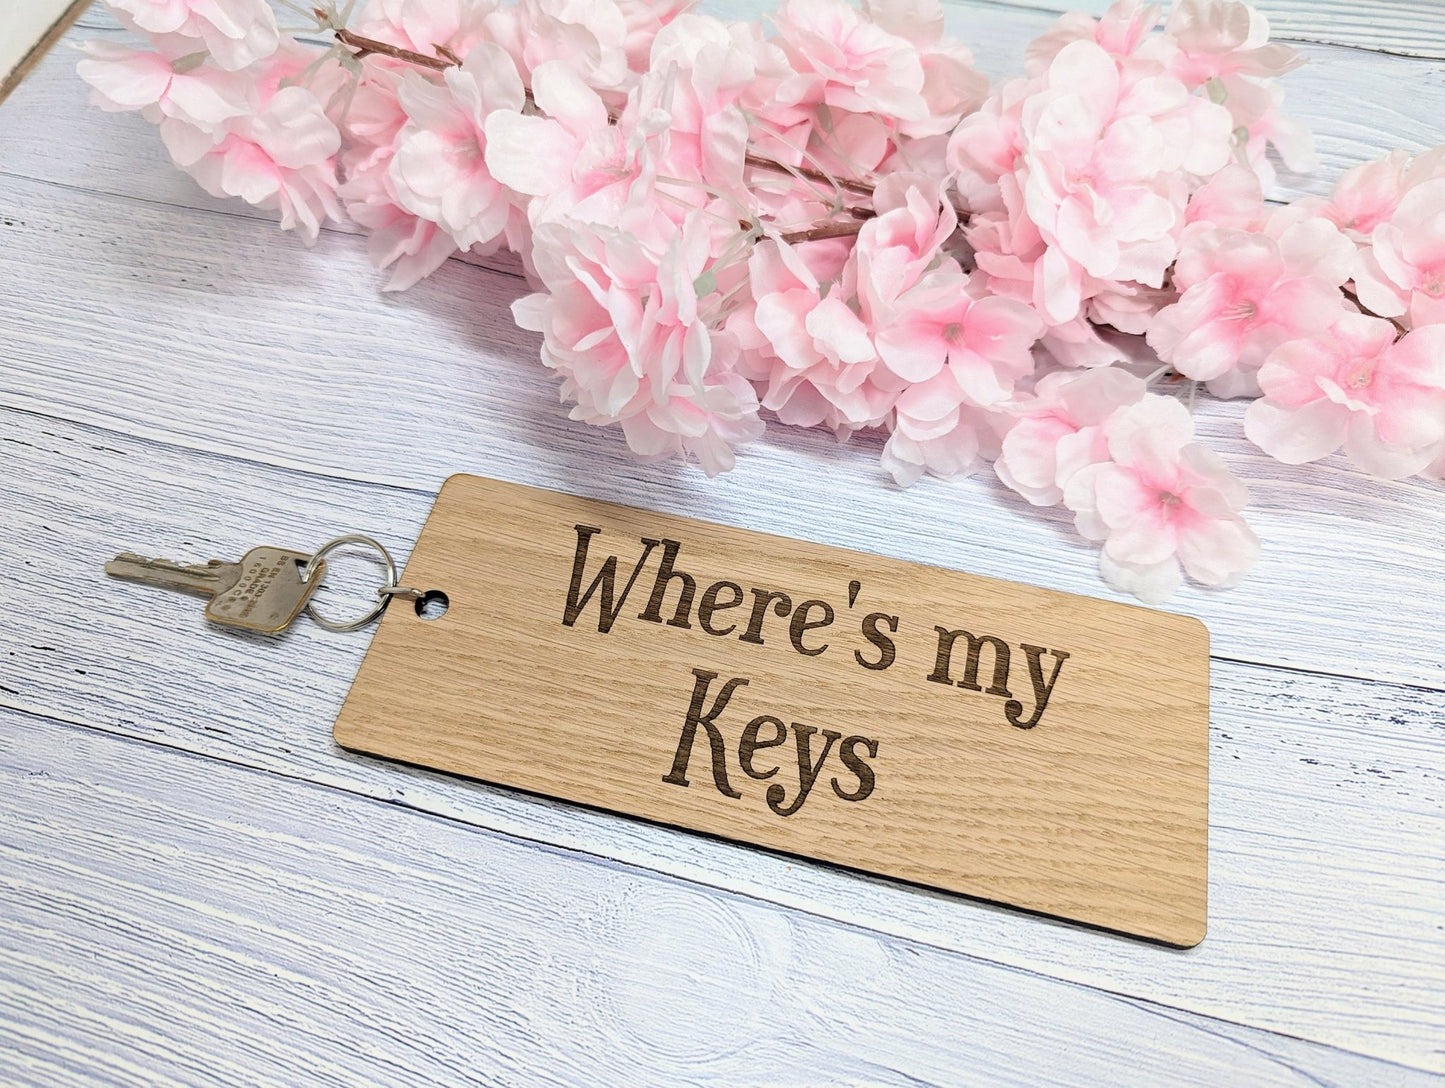 Extra-Large 200x80mm "Where's My Keys" Wooden Keyring - Ideal for First Car, New Home, or Those Who Misplace Keys - CherryGroveCraft